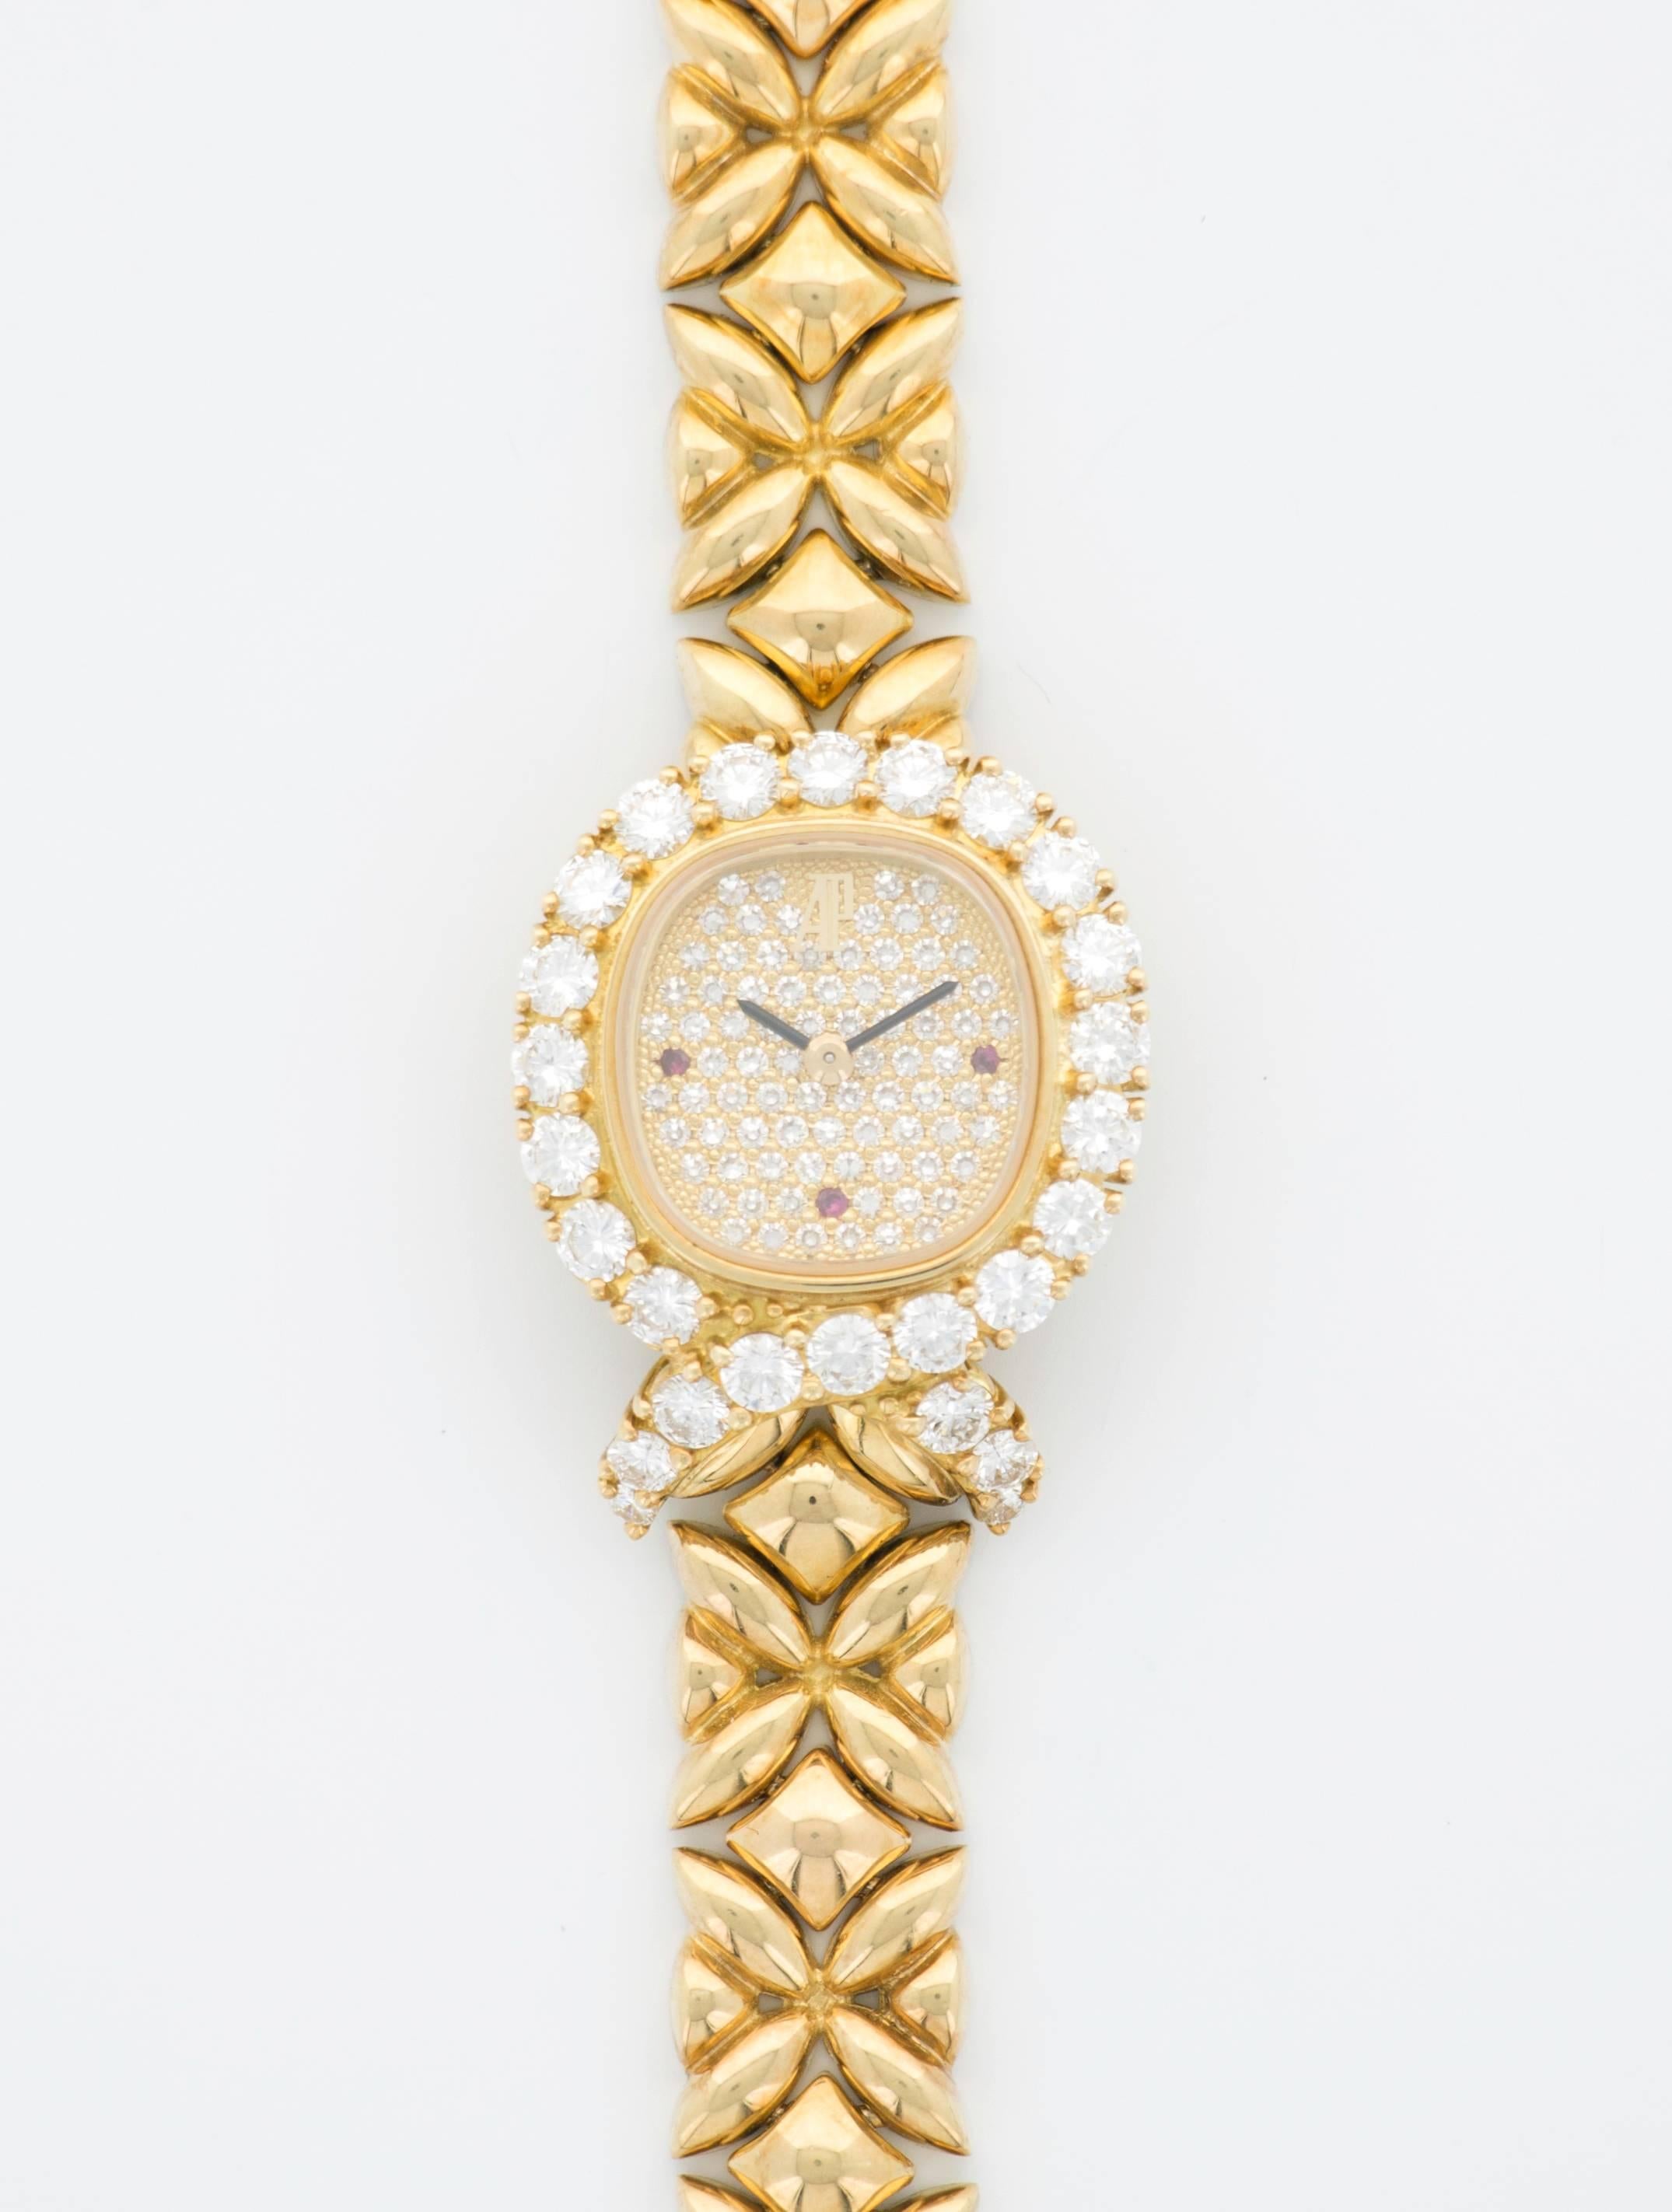 A lady's Audemars Piguet 18k Yellow Gold Bracelet Watch with Pave Diamond Dial and Ruby hour markers. Originally purchased for $53,300 in the 1980's. An absolutely beautiful, classic Audemars Piguet lady's watch.

